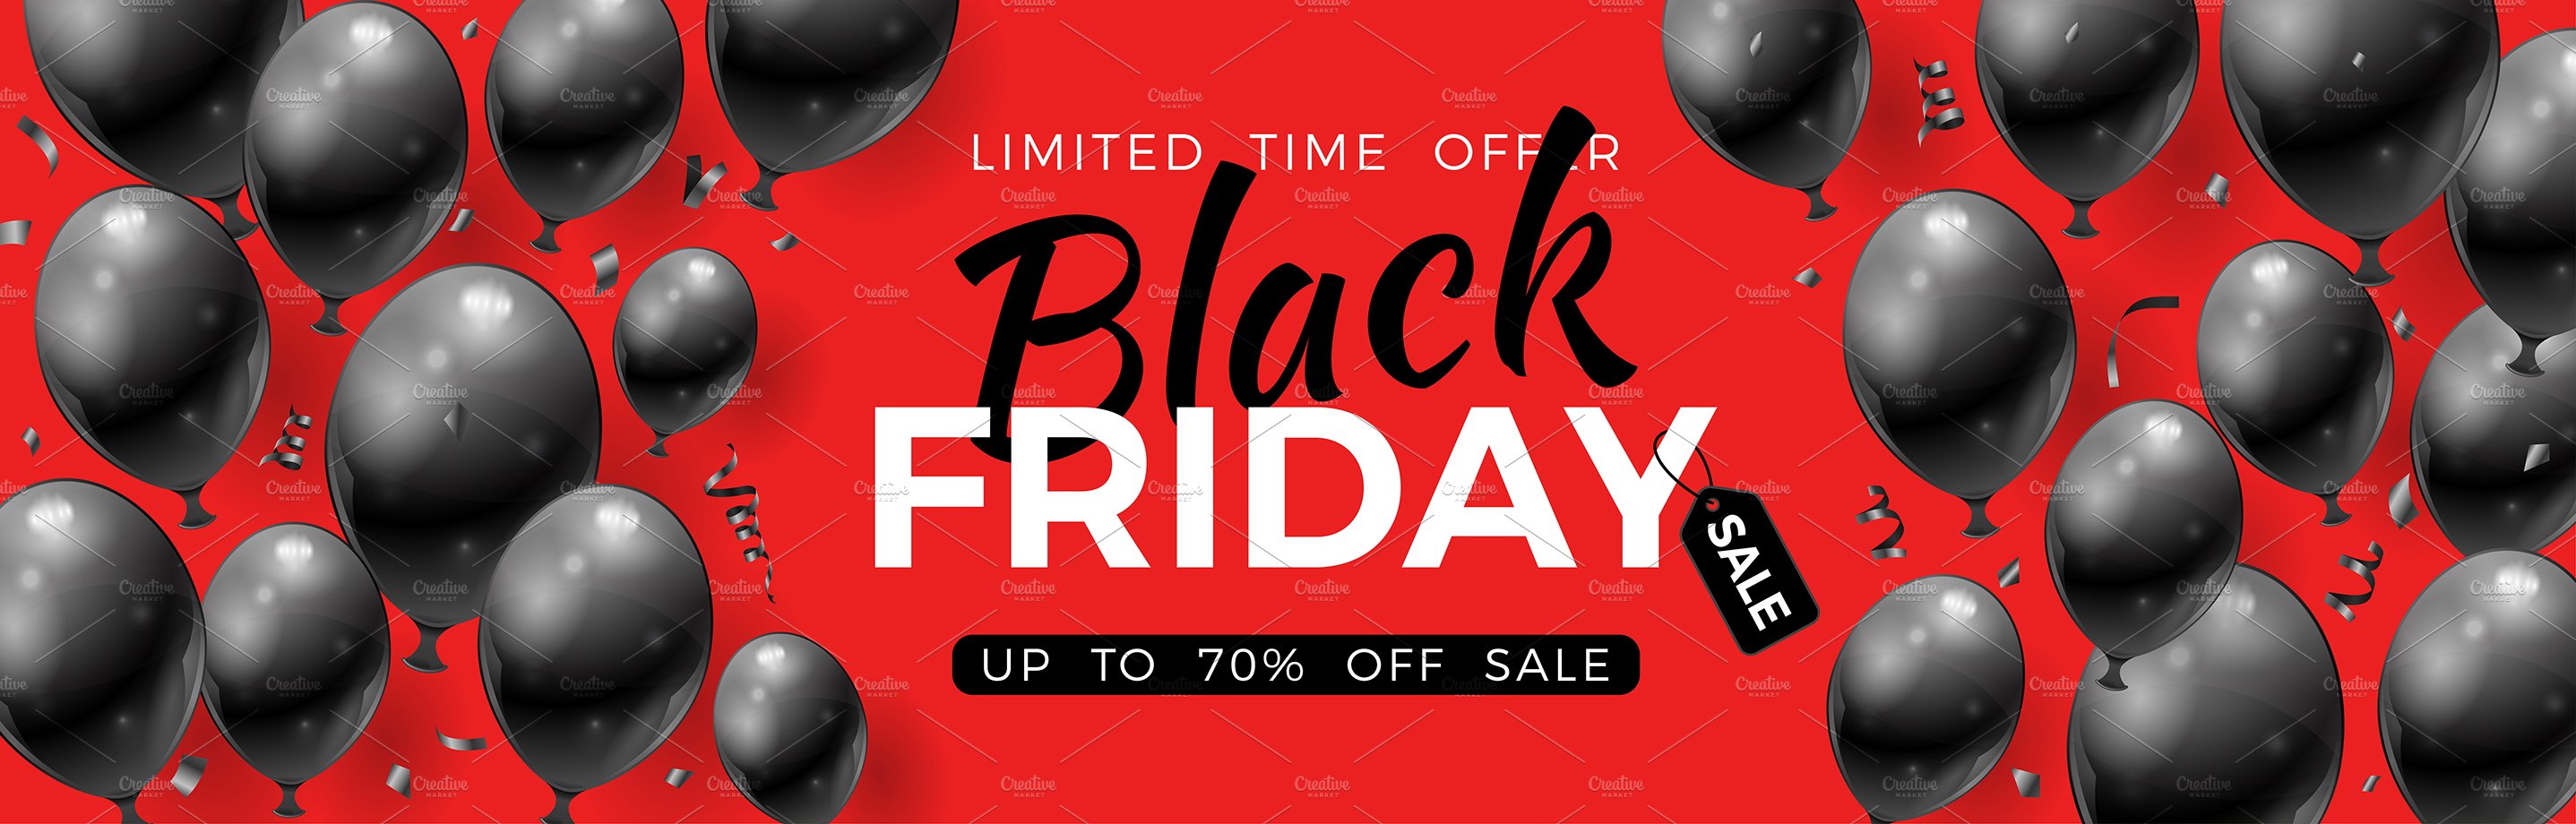 Horizontal red Black Friday banner with black balloons.